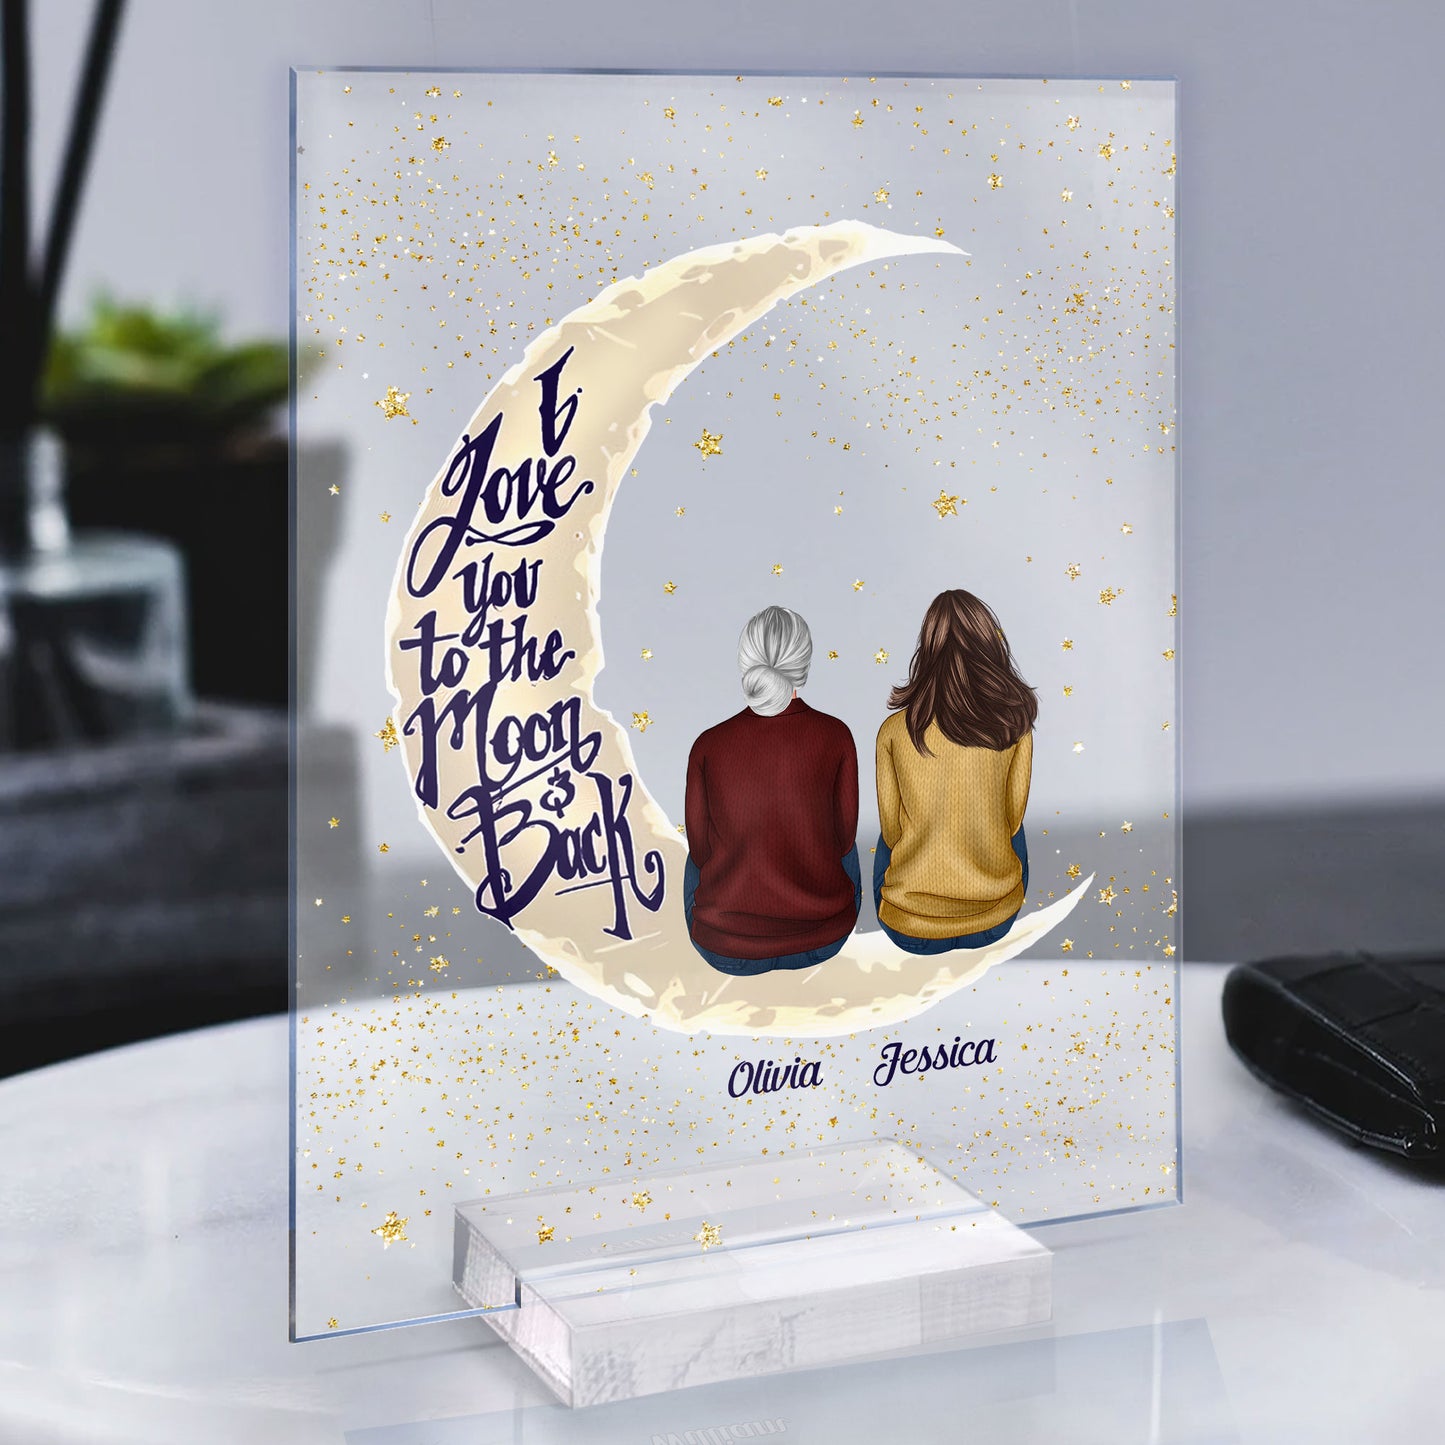 I Love You To The Moon And Back - Personalized Acrylic Plaque